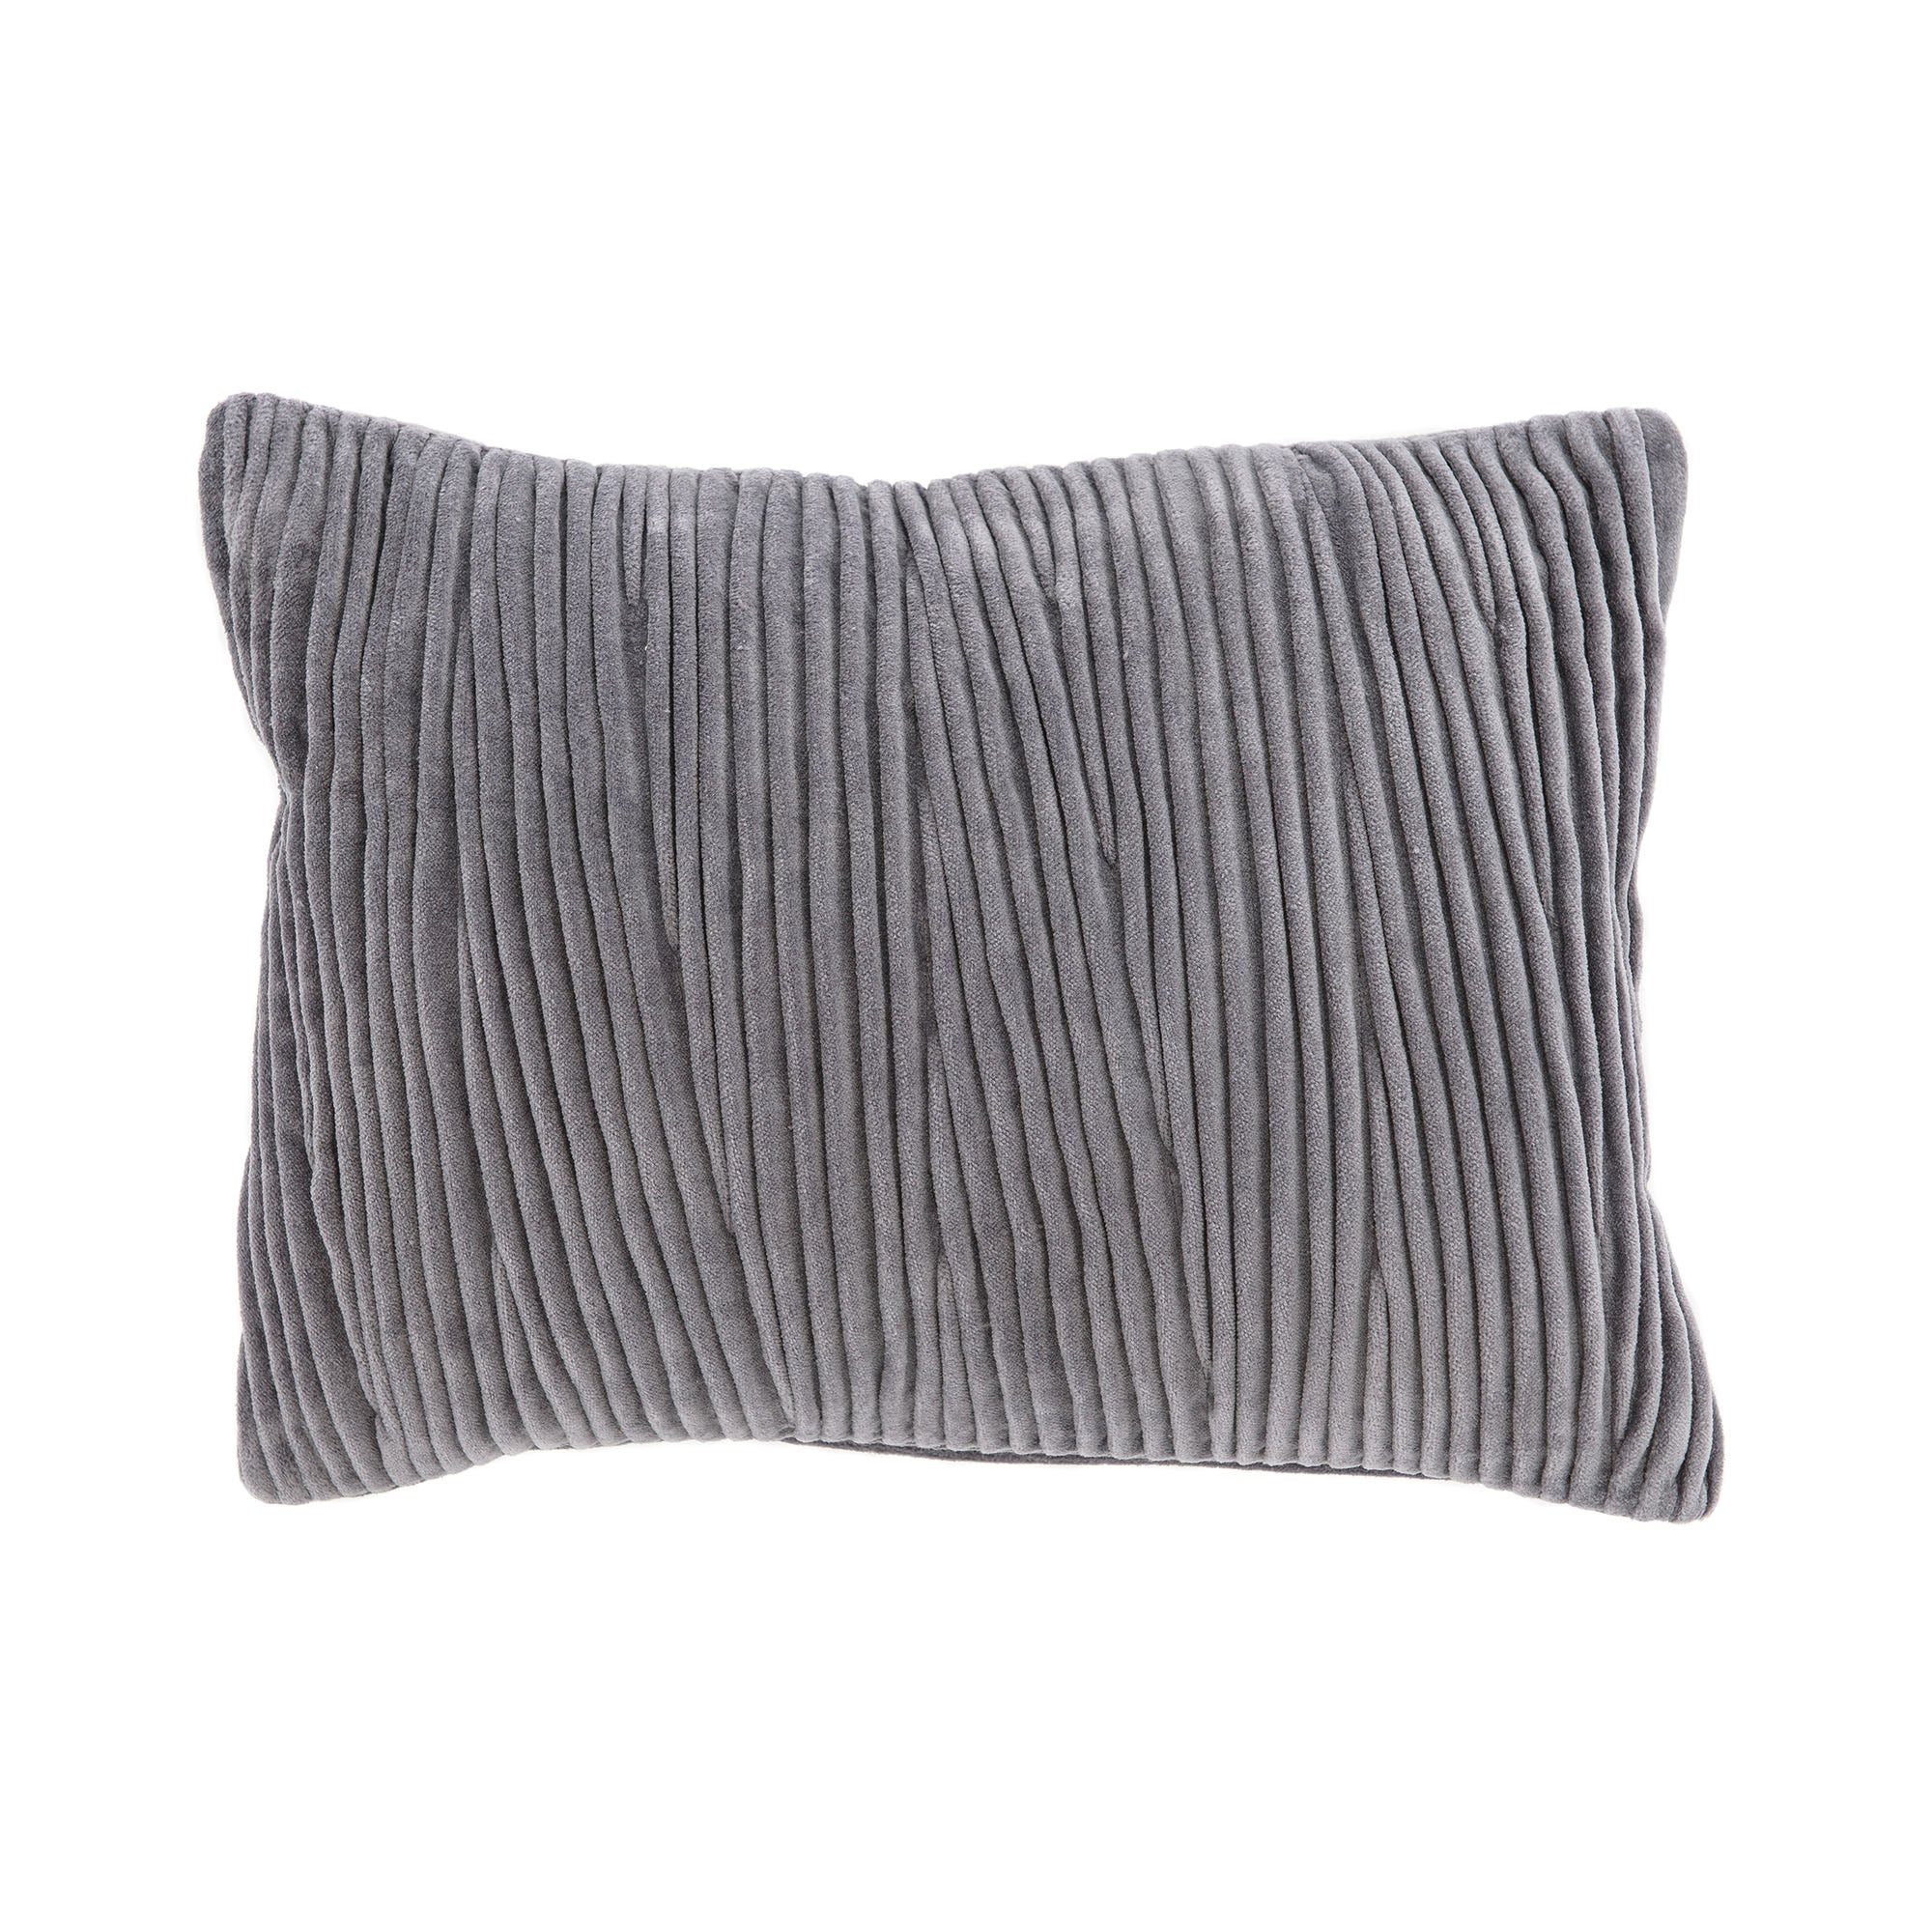 Filled Cushions | Small & Large Filled Cushions | Dunelm - Page 7